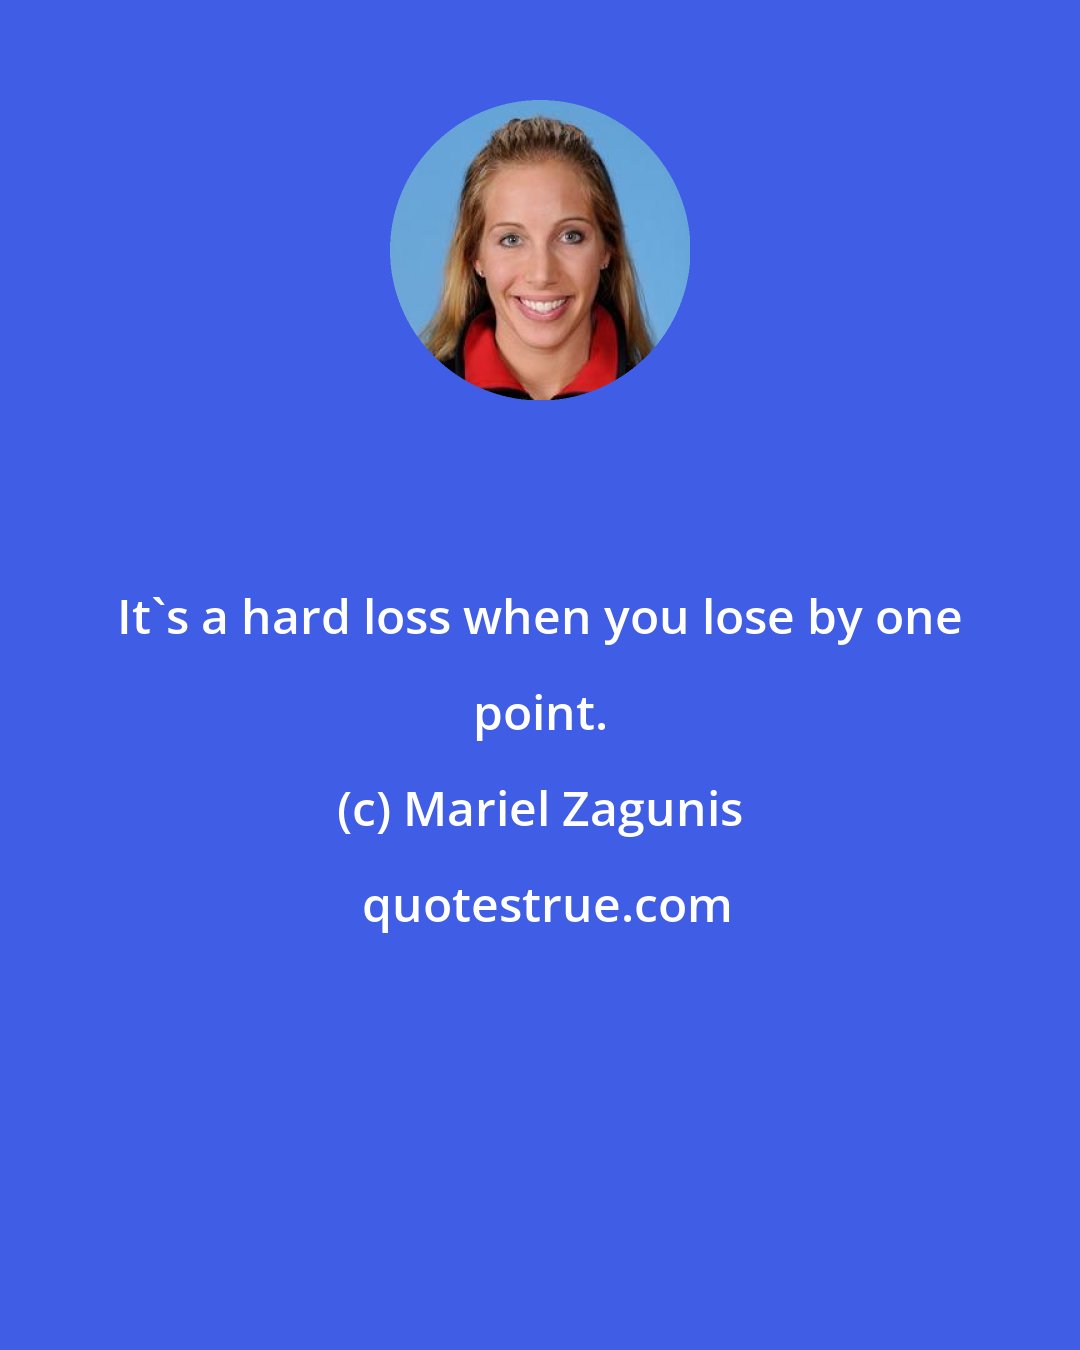 Mariel Zagunis: It's a hard loss when you lose by one point.